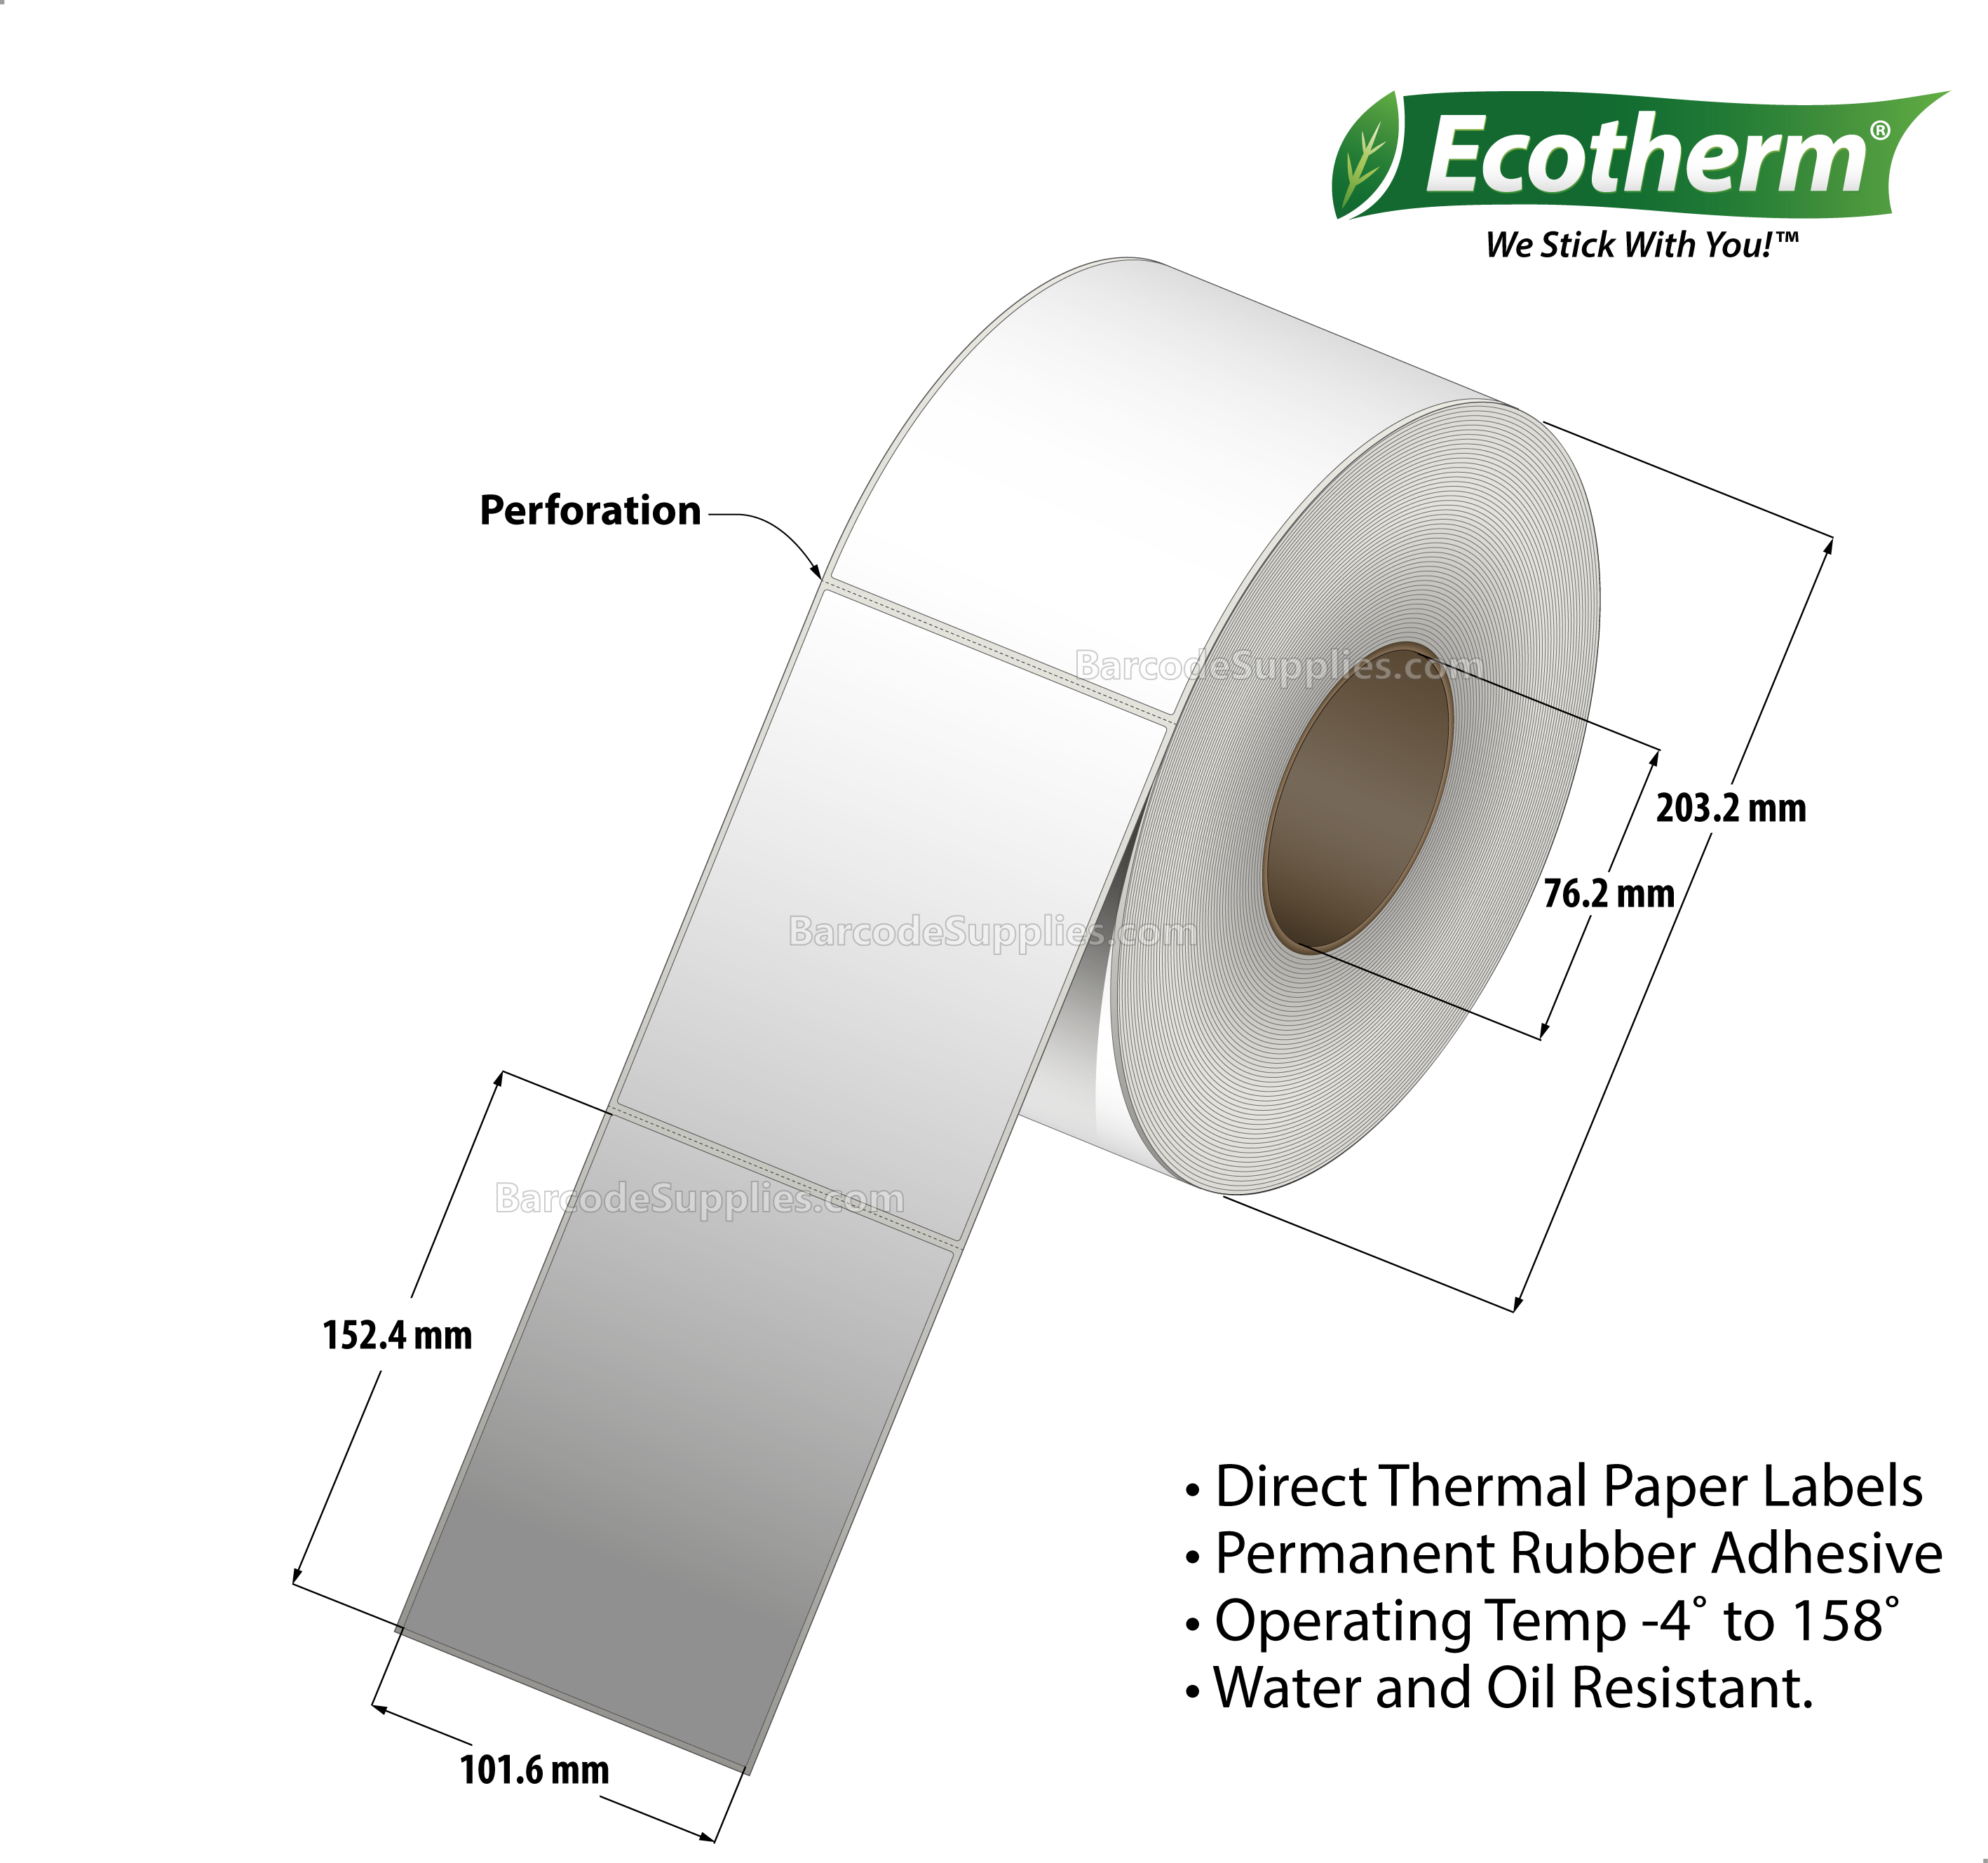 4 x 6 Direct Thermal White Labels With Rubber Adhesive - Perforated - 1180 Labels Per Roll - Carton Of 4 Rolls - 4720 Labels Total - MPN: DT8400600-3P-4